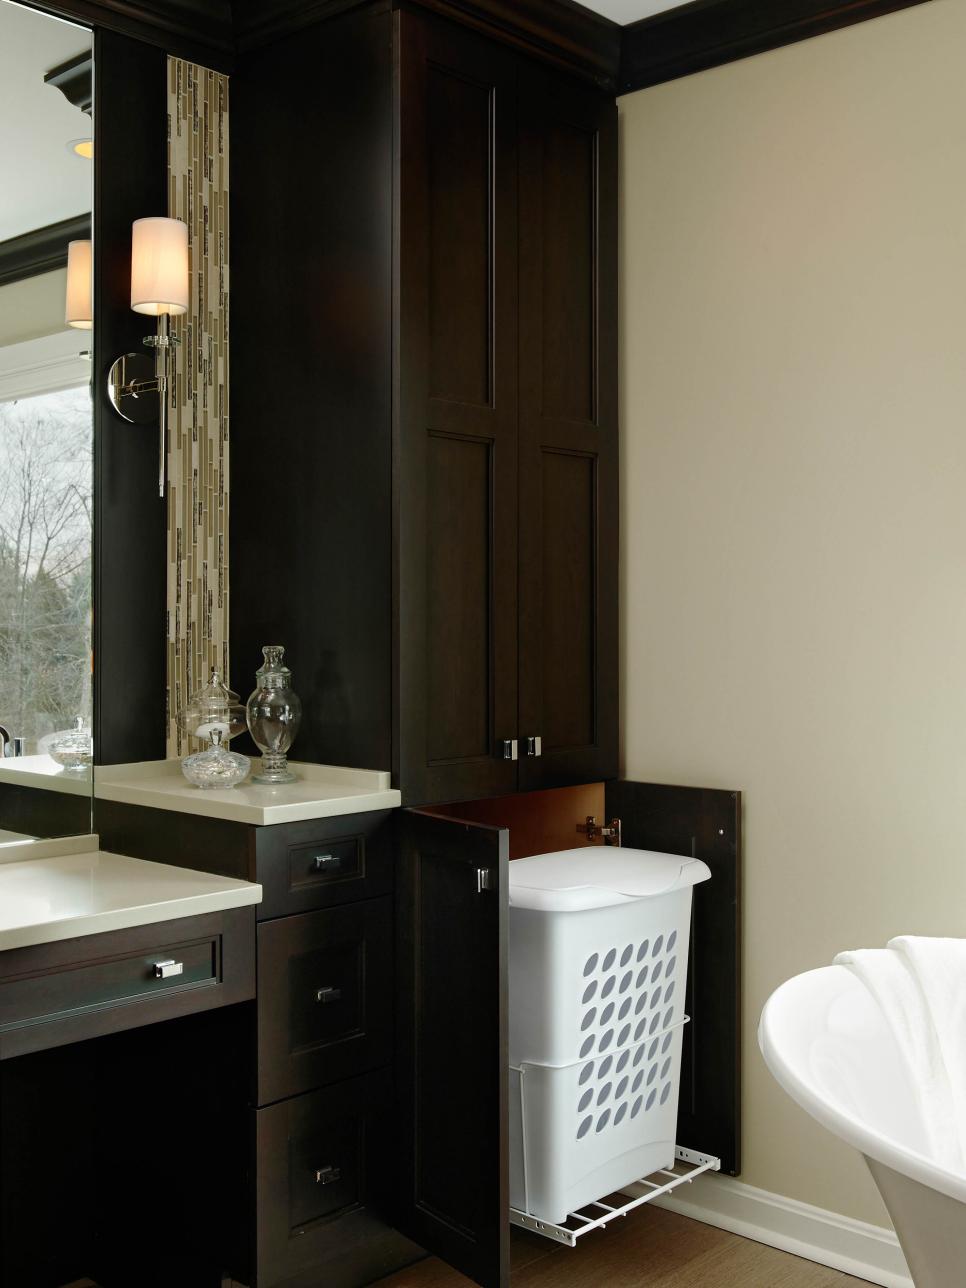 Dark Cabinetry With Hamper Pullout in Neutral Bathroom